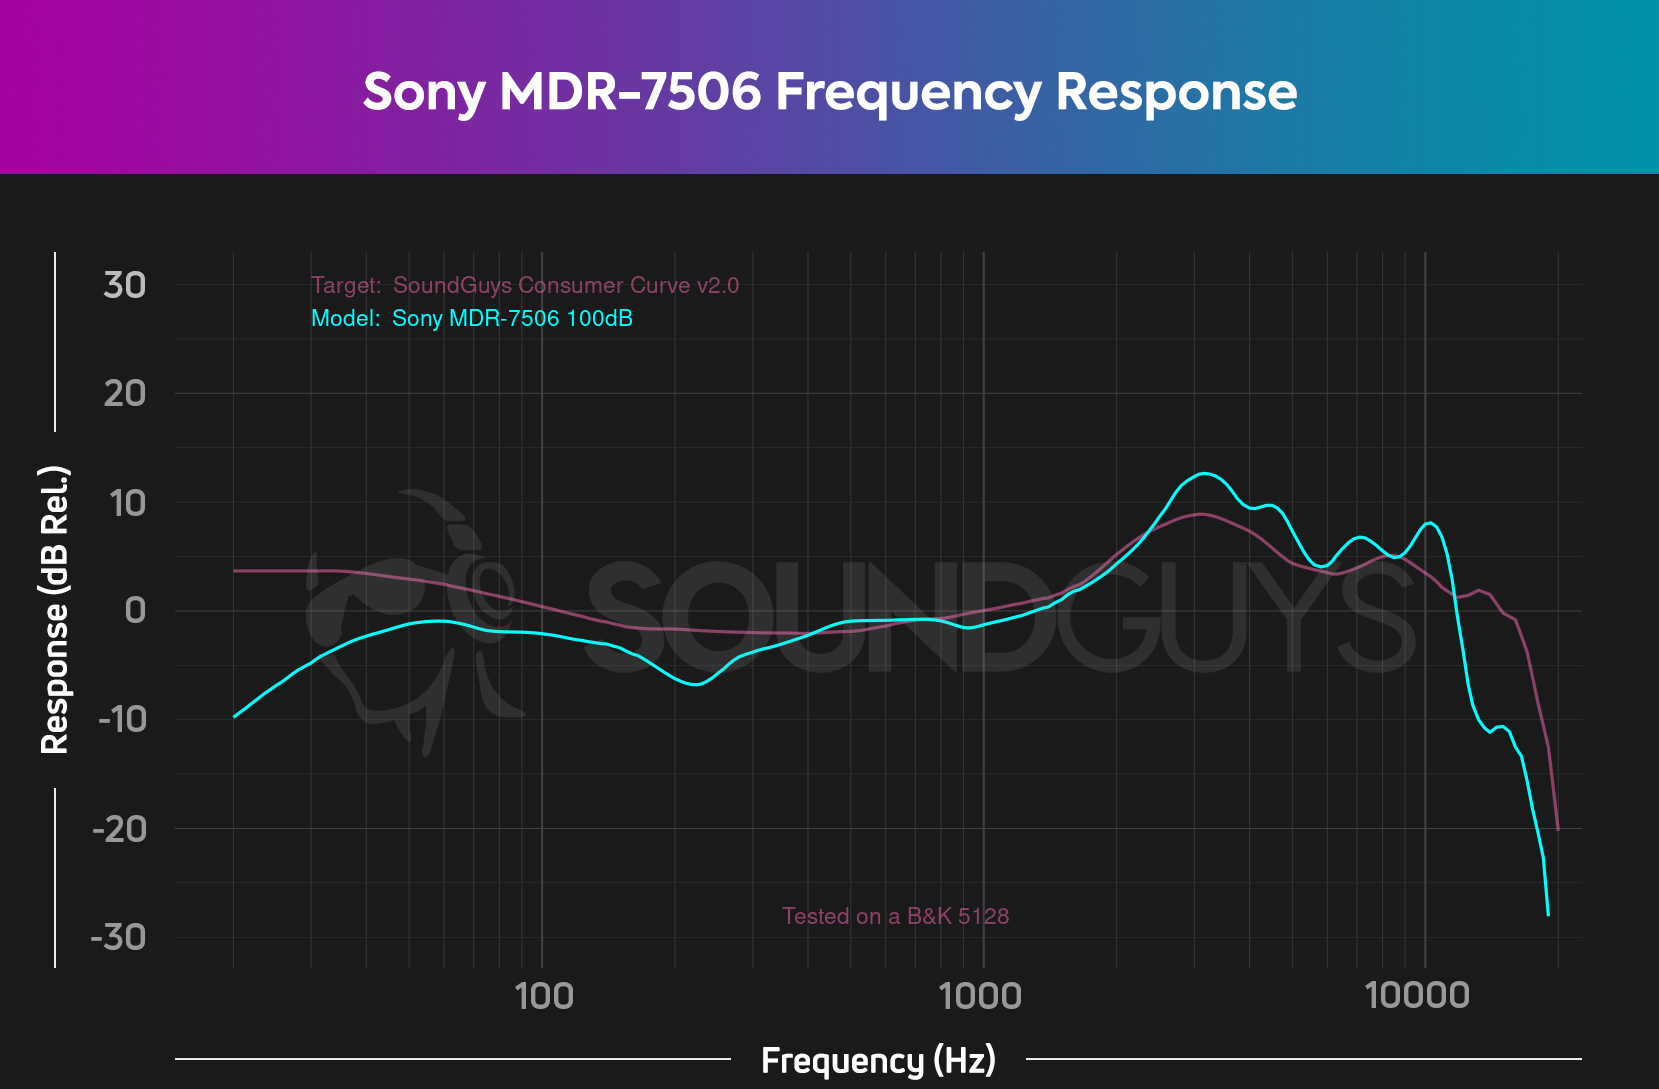 The Sony MDR-7506 doesn't match up to consumer sound all that well.